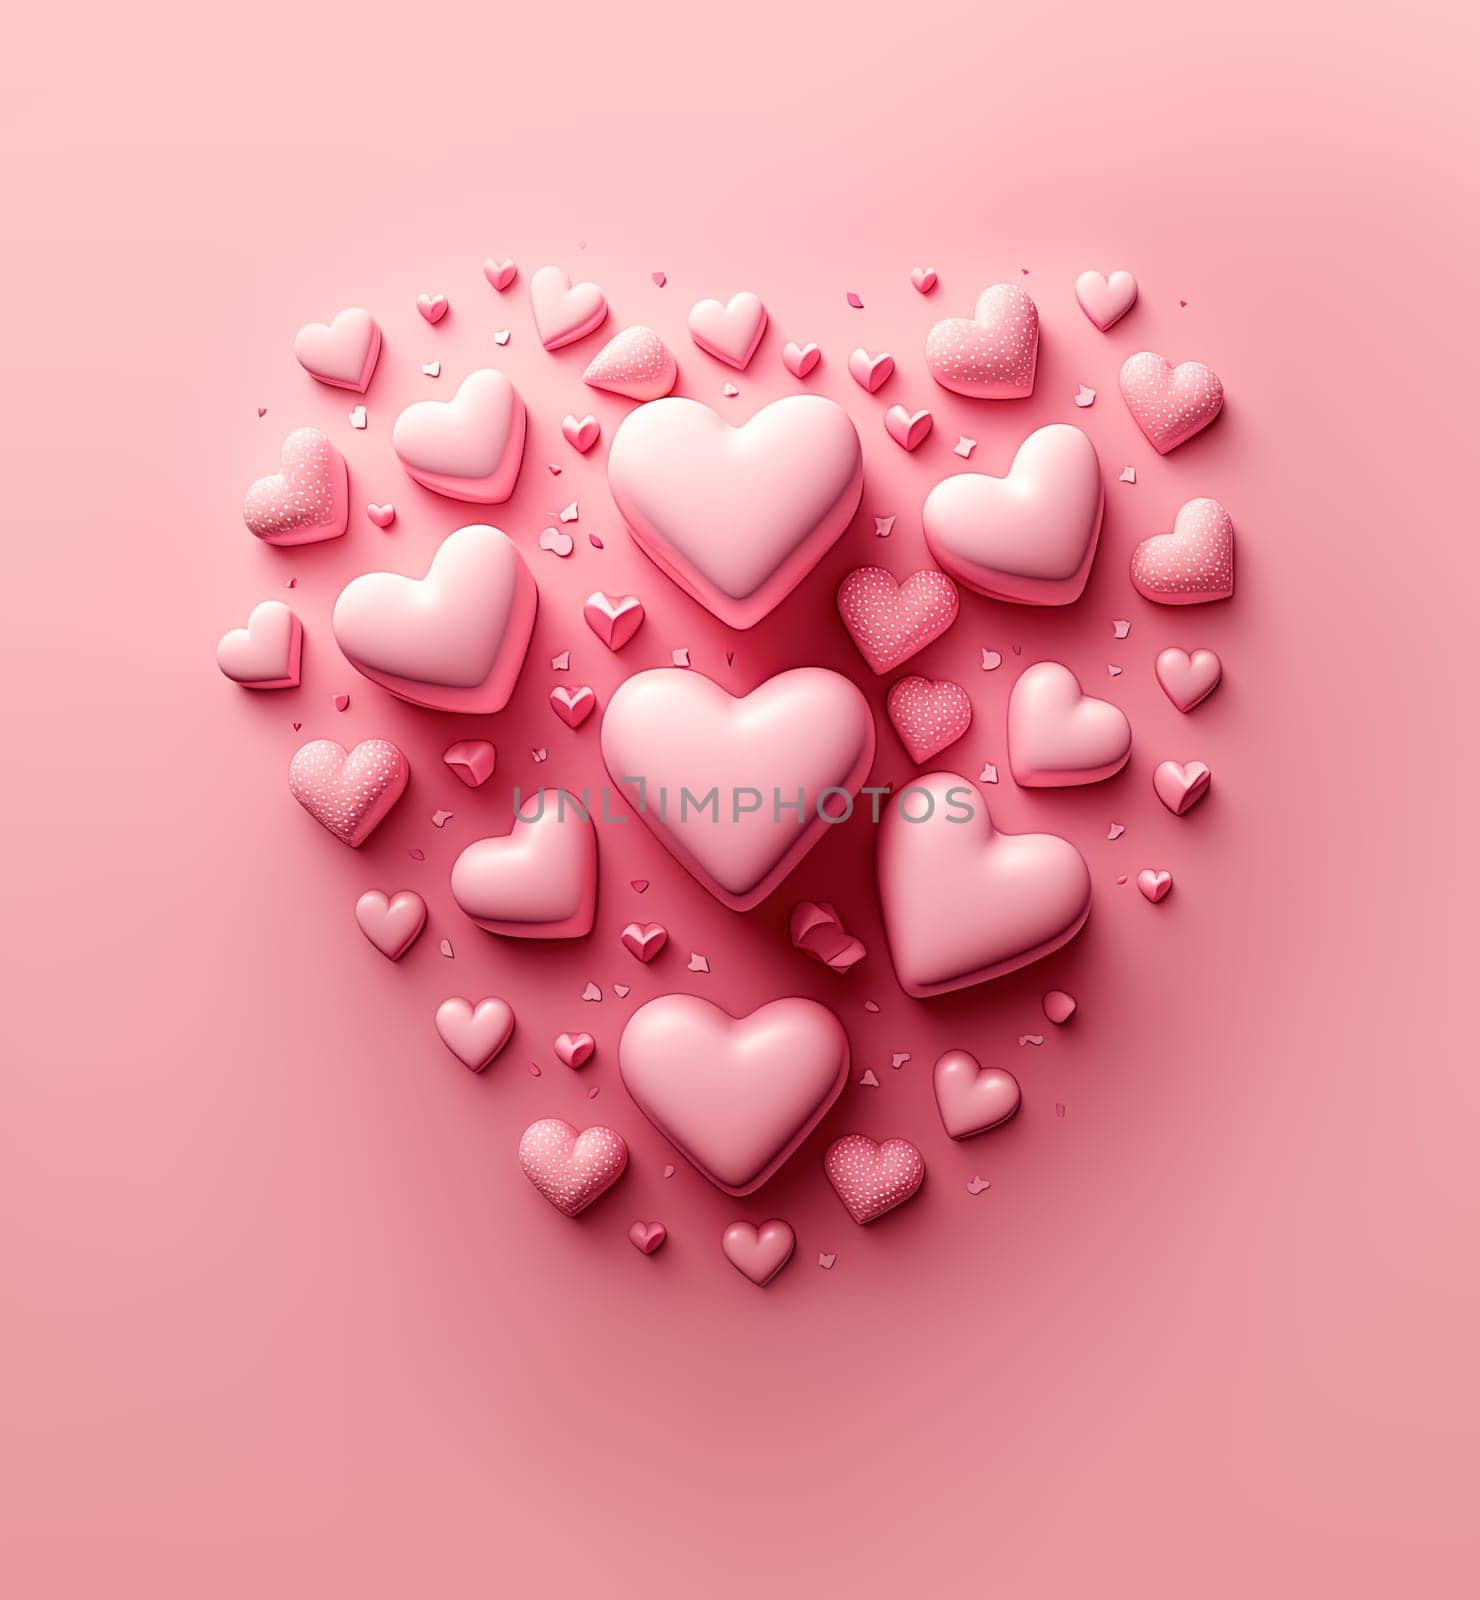 Pink Hearts for Valentine's day Holiday. Illustration of placard, book about love and girls with copy space.